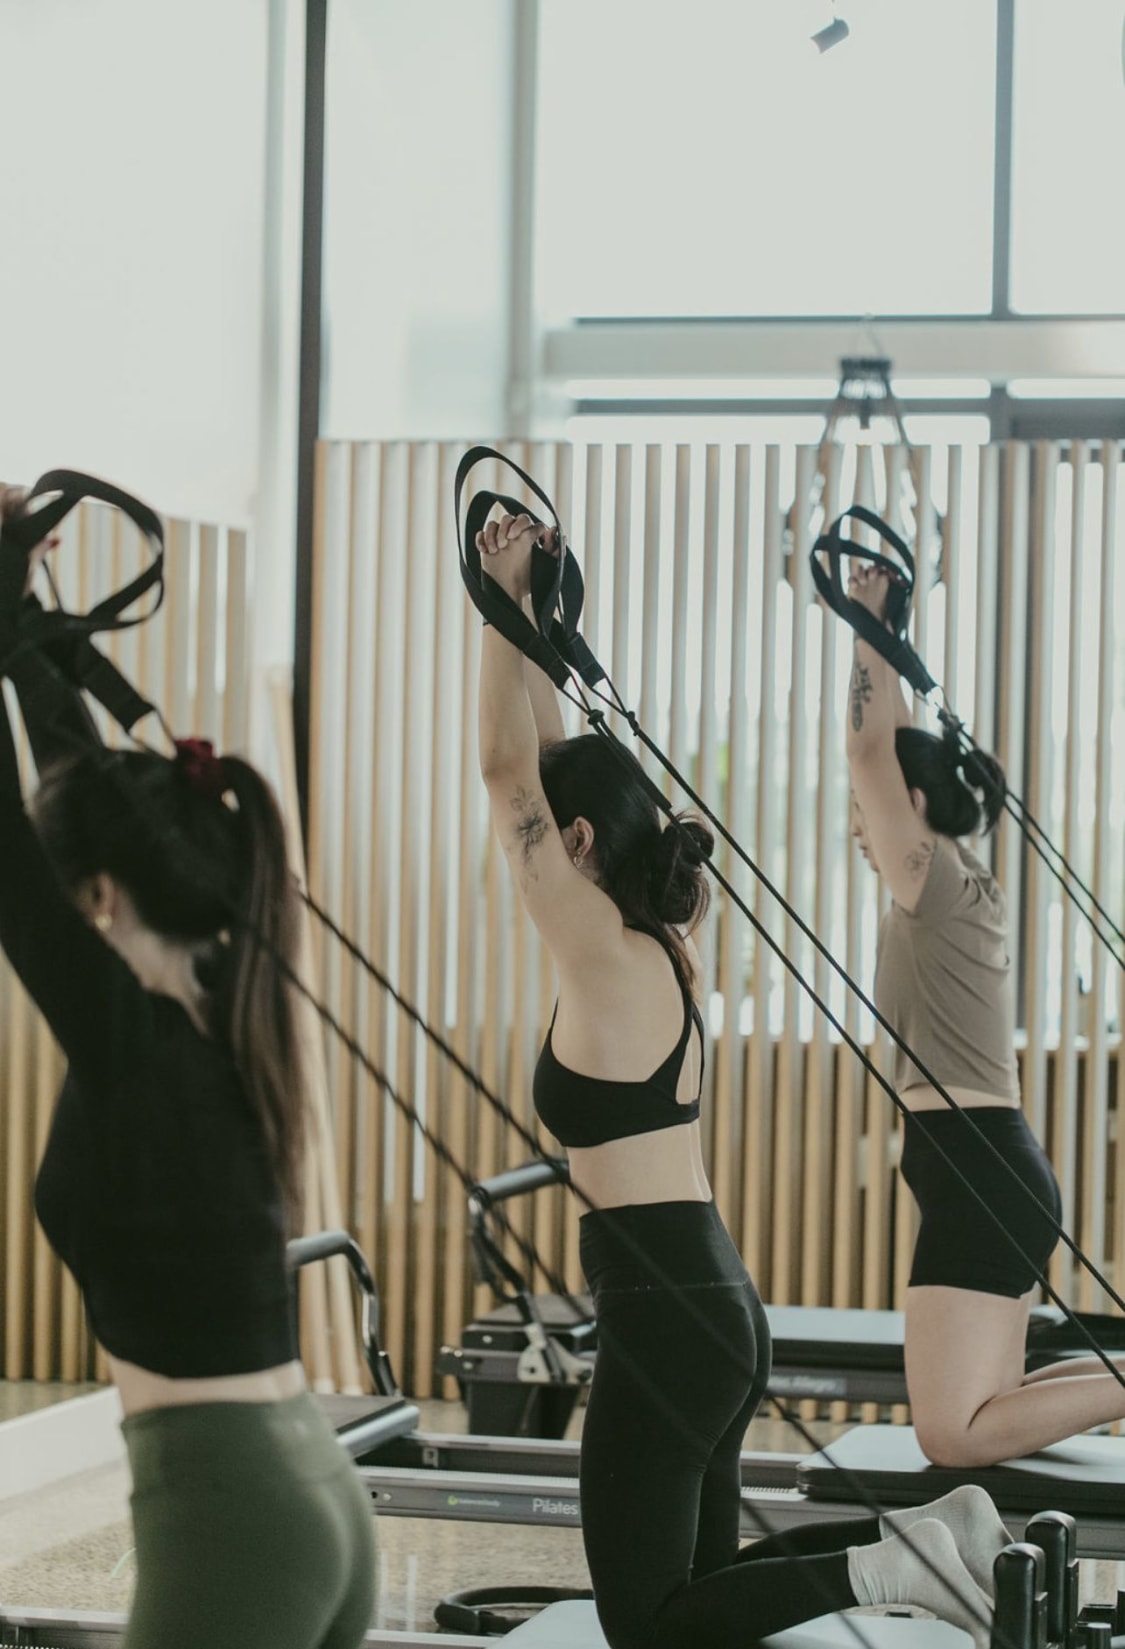 Reform Fitness Ormiston: Read Reviews and Book Classes on ClassPass